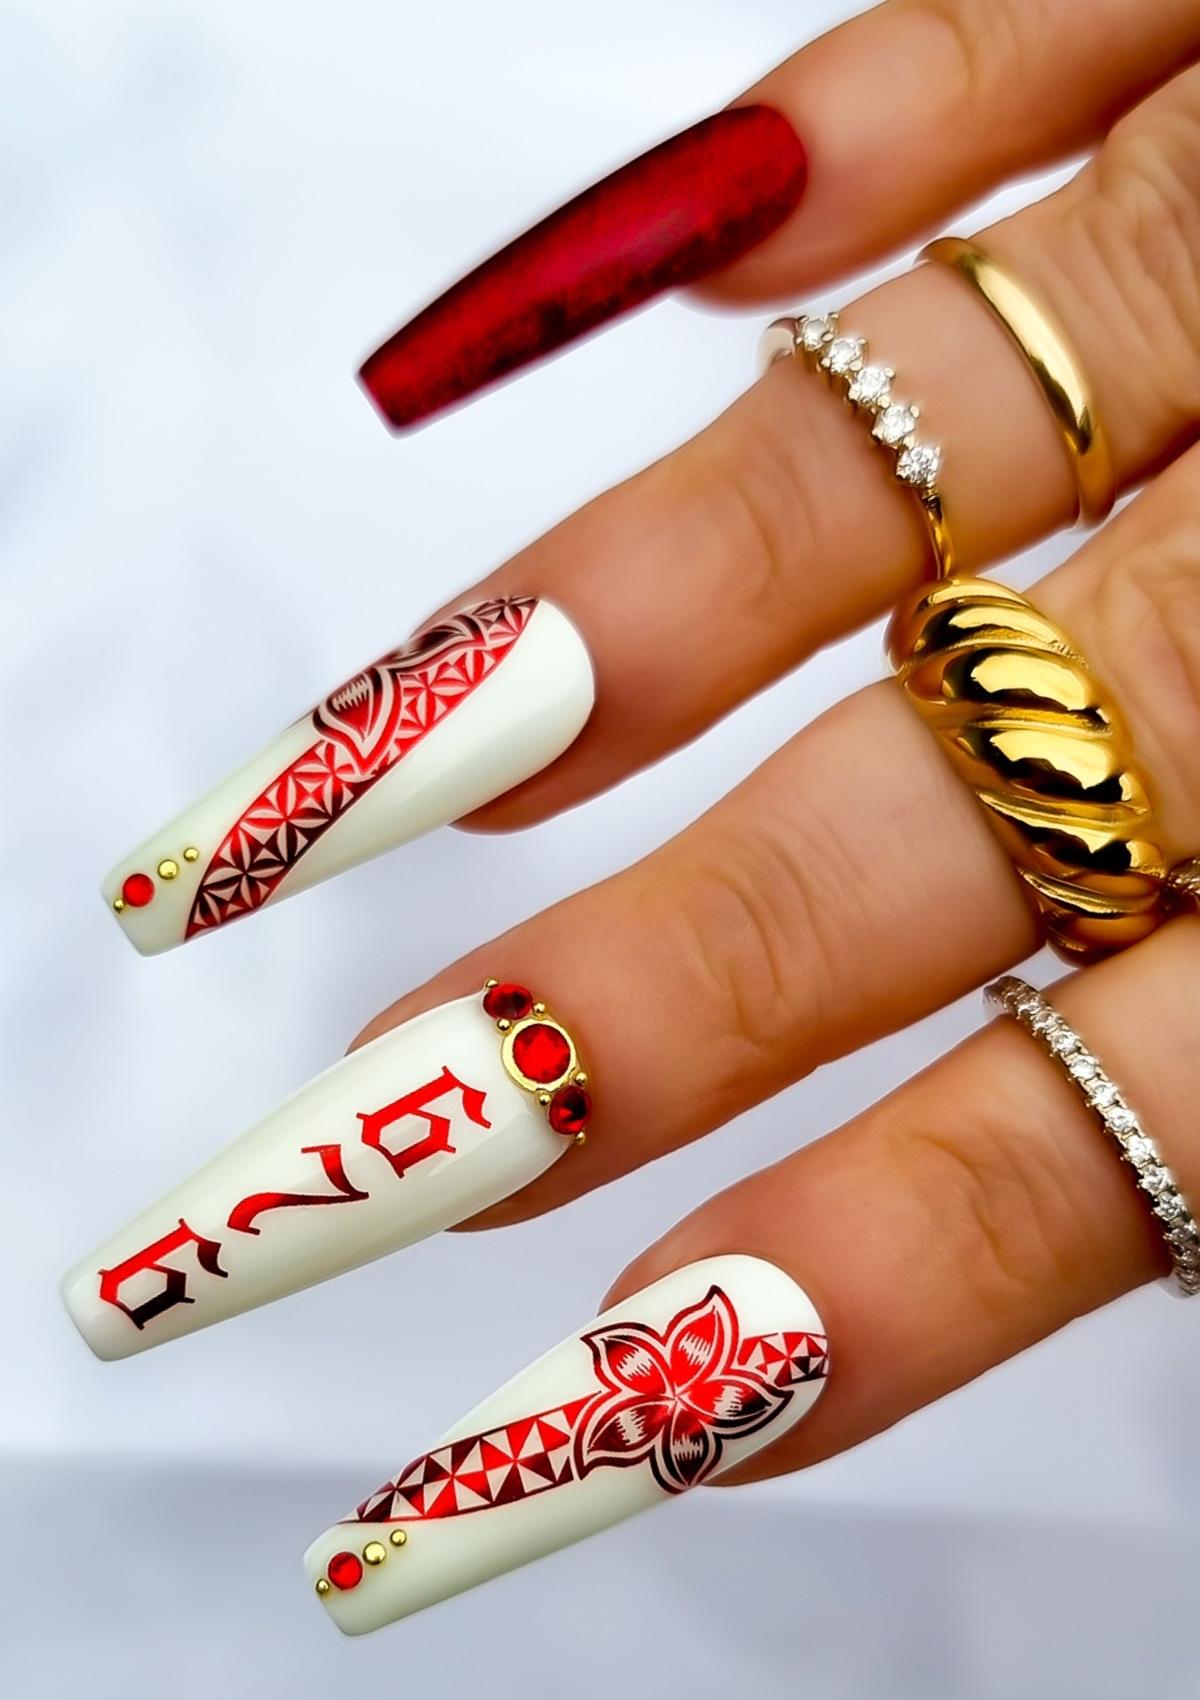 Red and white set of nails with red Tongan patterns , flowers and red and gold accents. Numbers 676 on middle fingernail.  